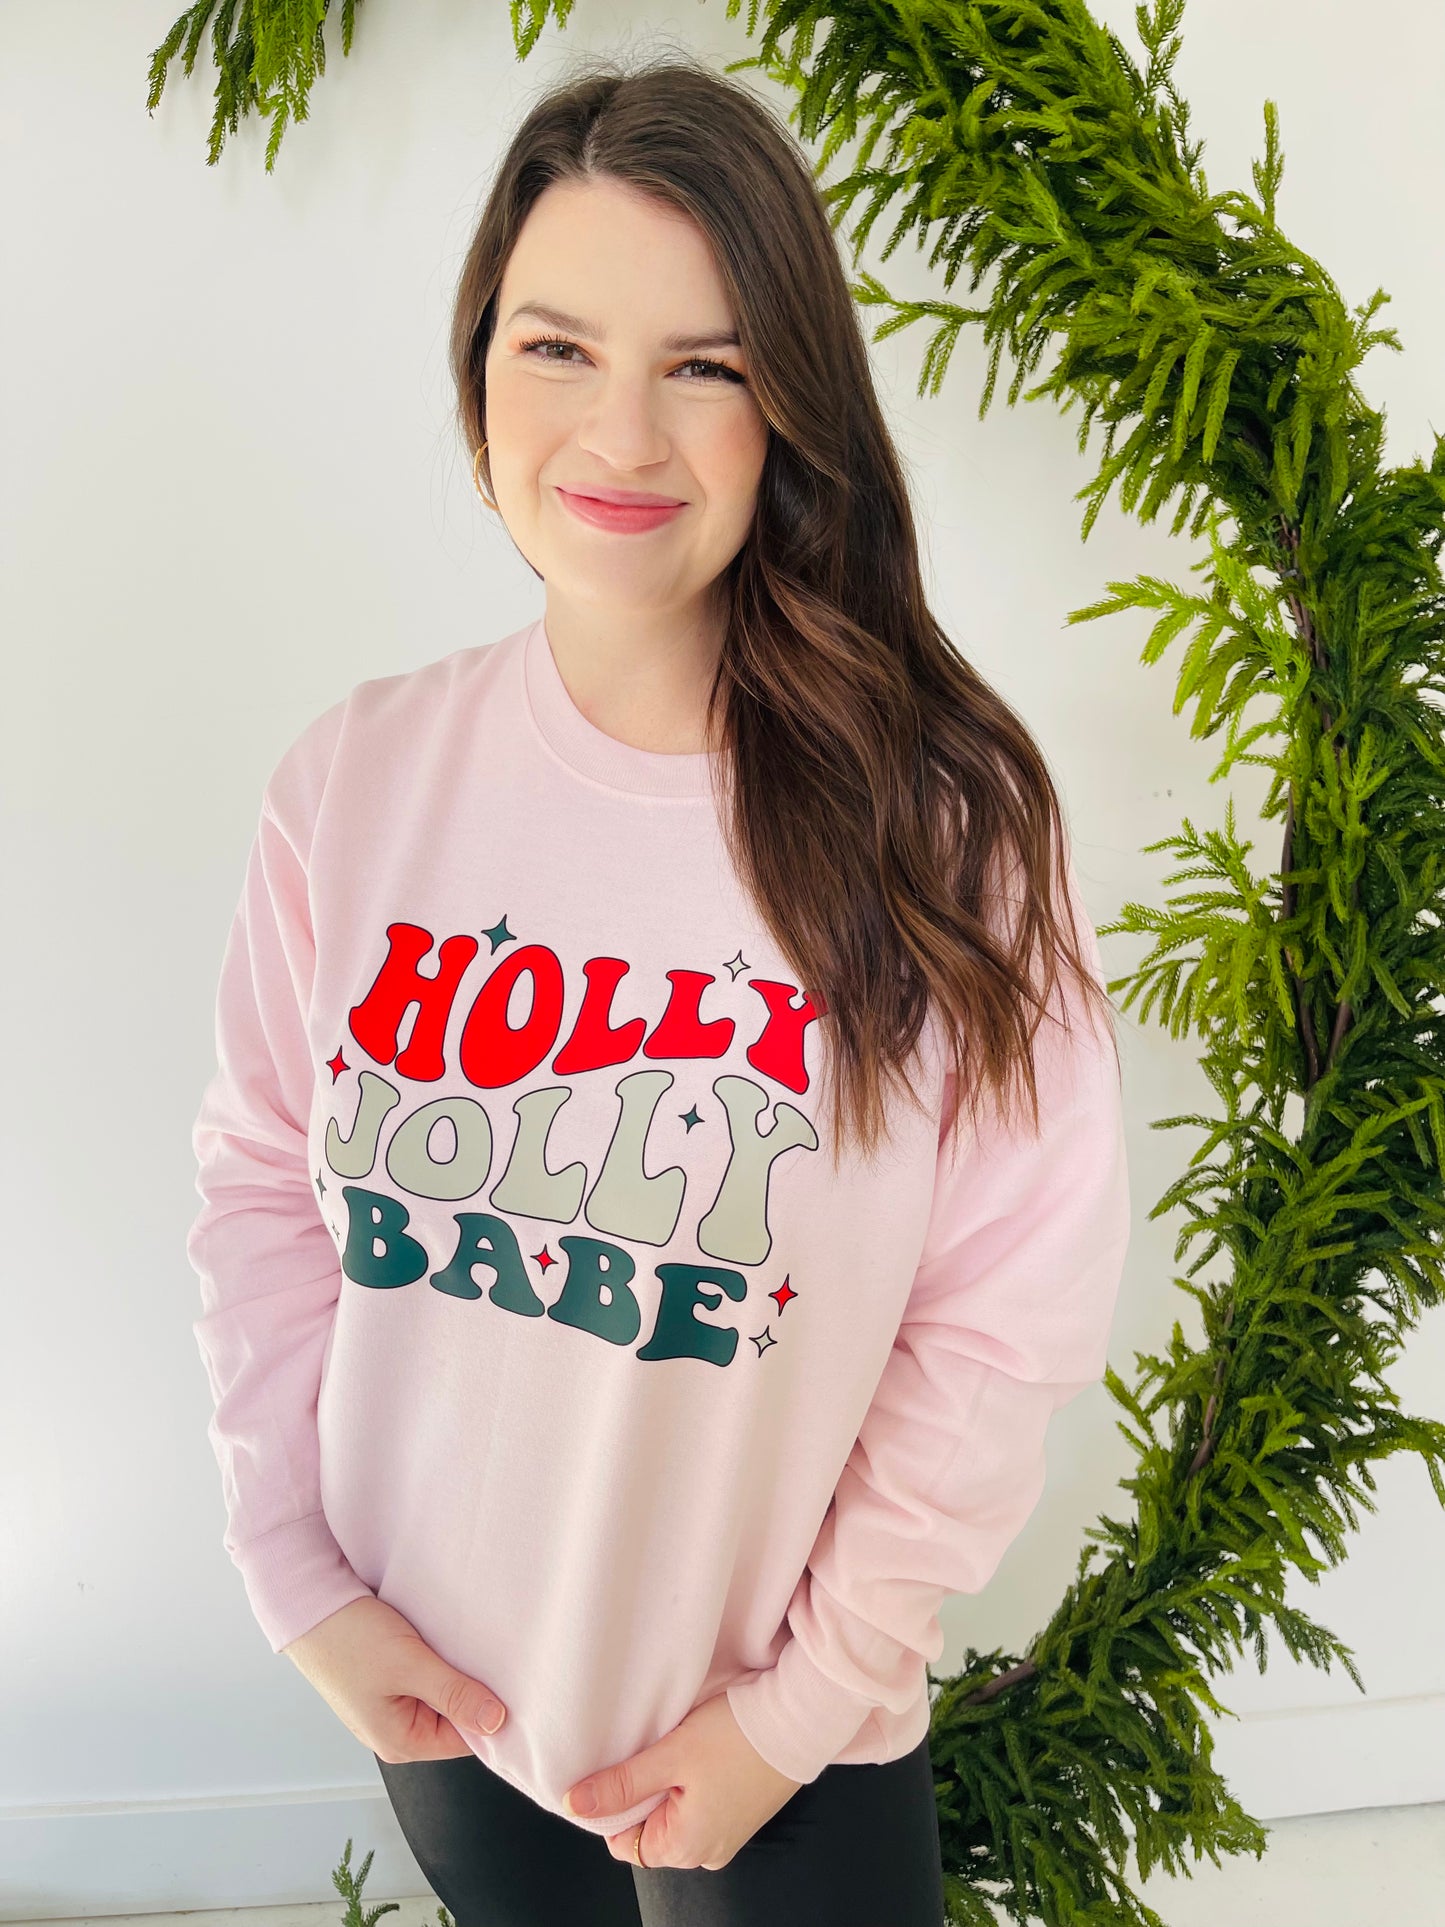 Are you a holly jolly babe this time of year? This sweatshirt is calling your name if so! This fun crewneck sweatshirt is a soft, light pink color with a vibrant retro looking graphic. 